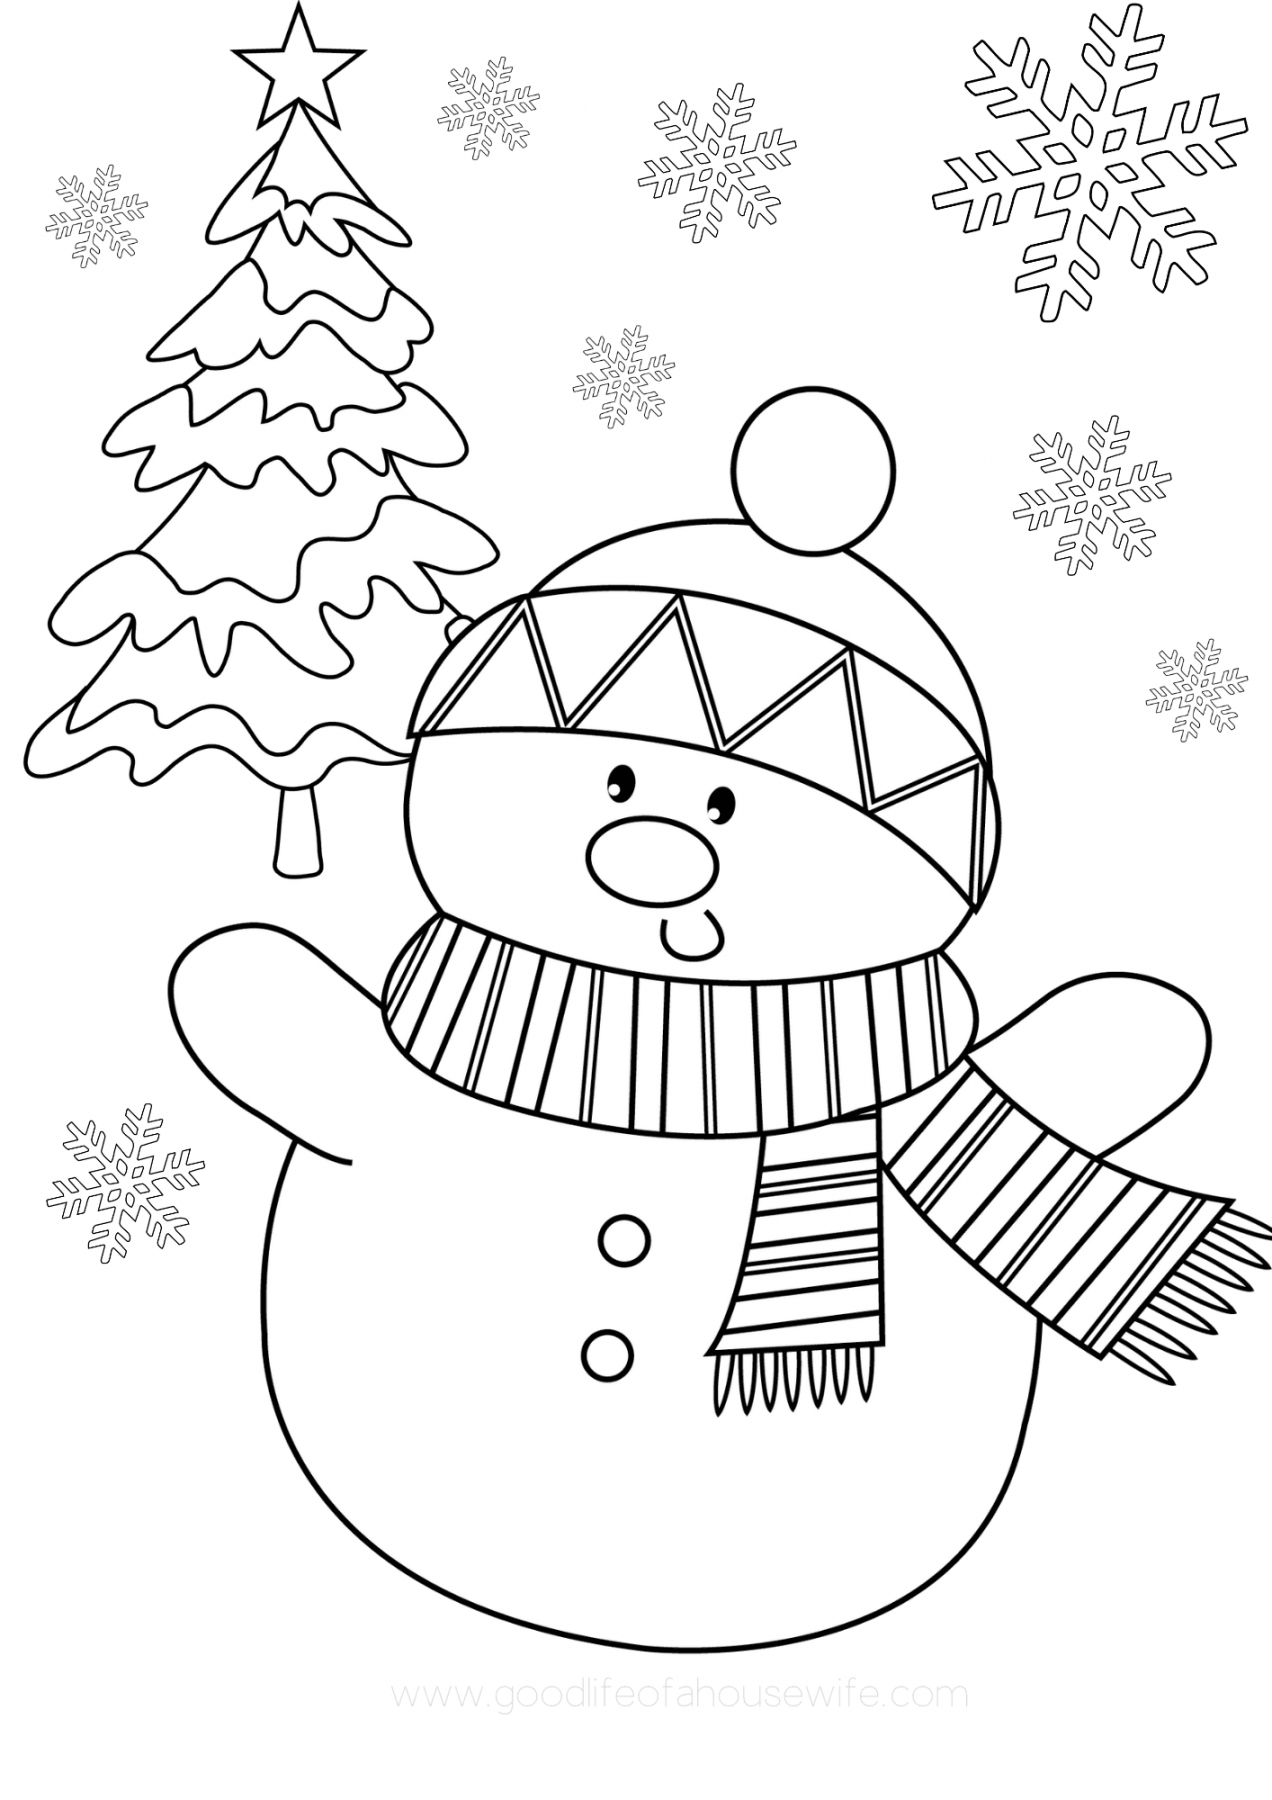 Christmas Free Printable Coloring Pages - Printable - Free Printable Christmas Coloring Pages - Good Life of a Housewife